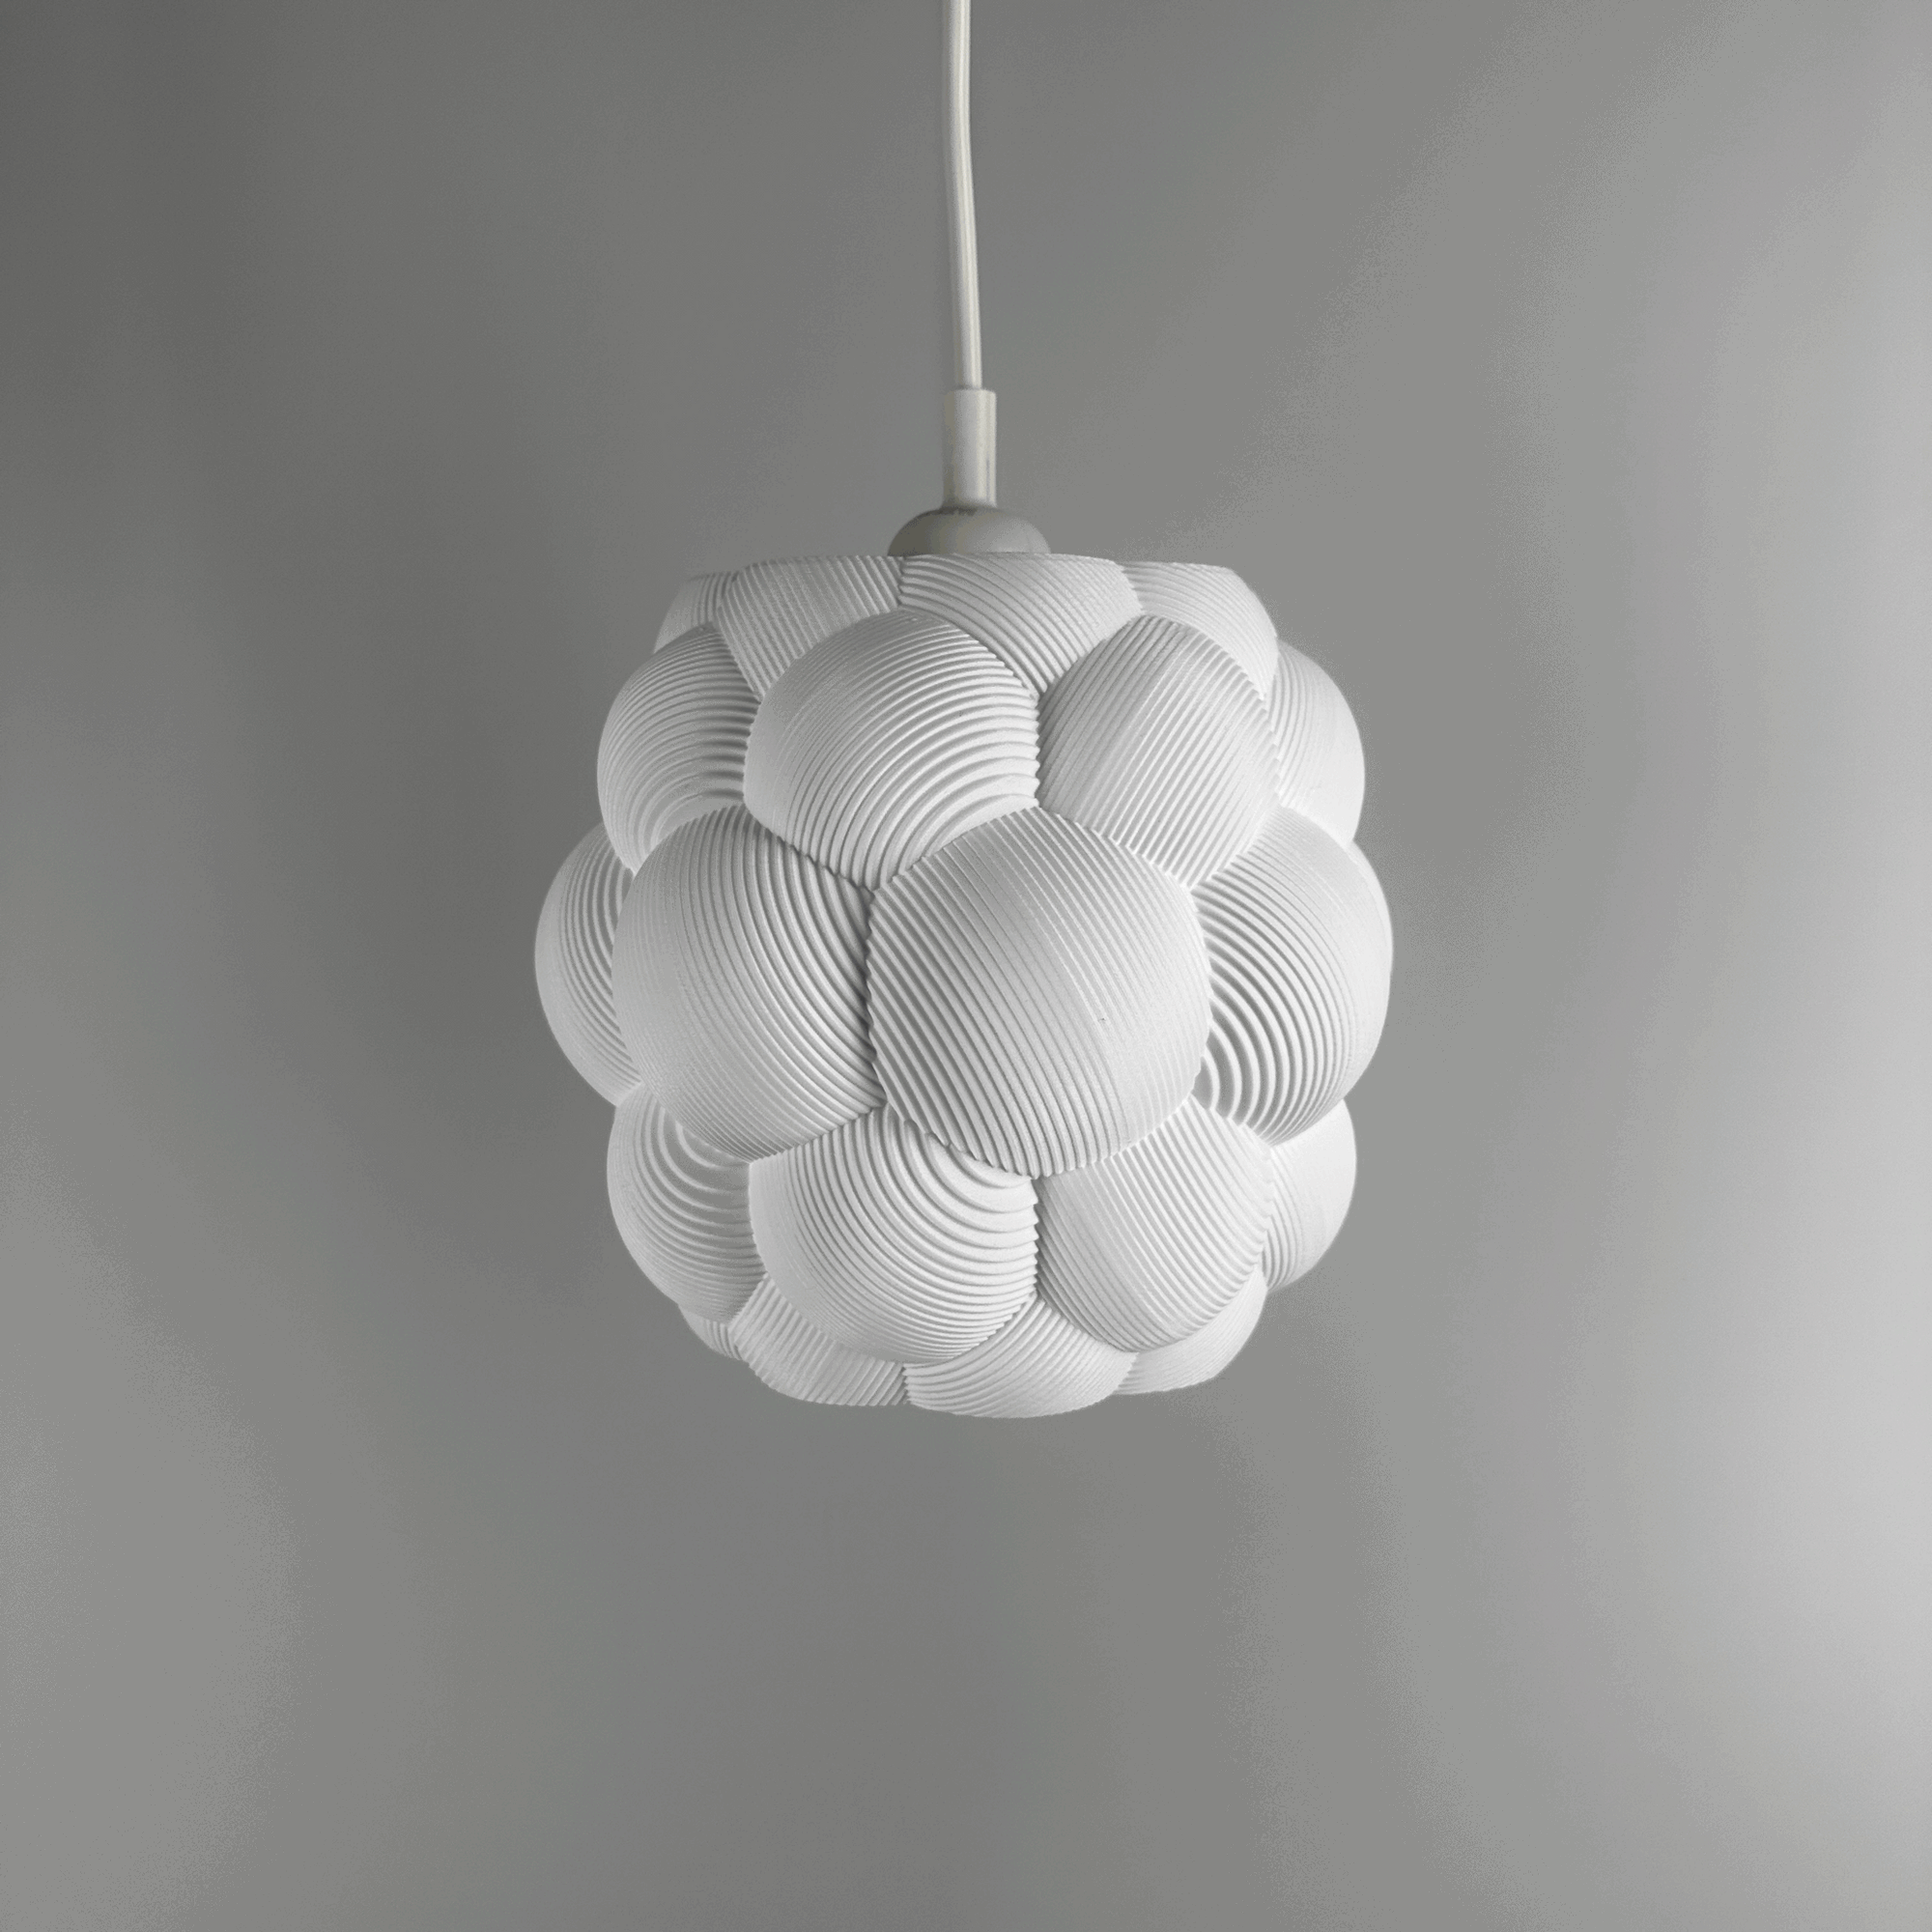 3D printed Apo Malli lampshade in modern design in cotton white biodegradable material. Used with 400k LED bulb on and off